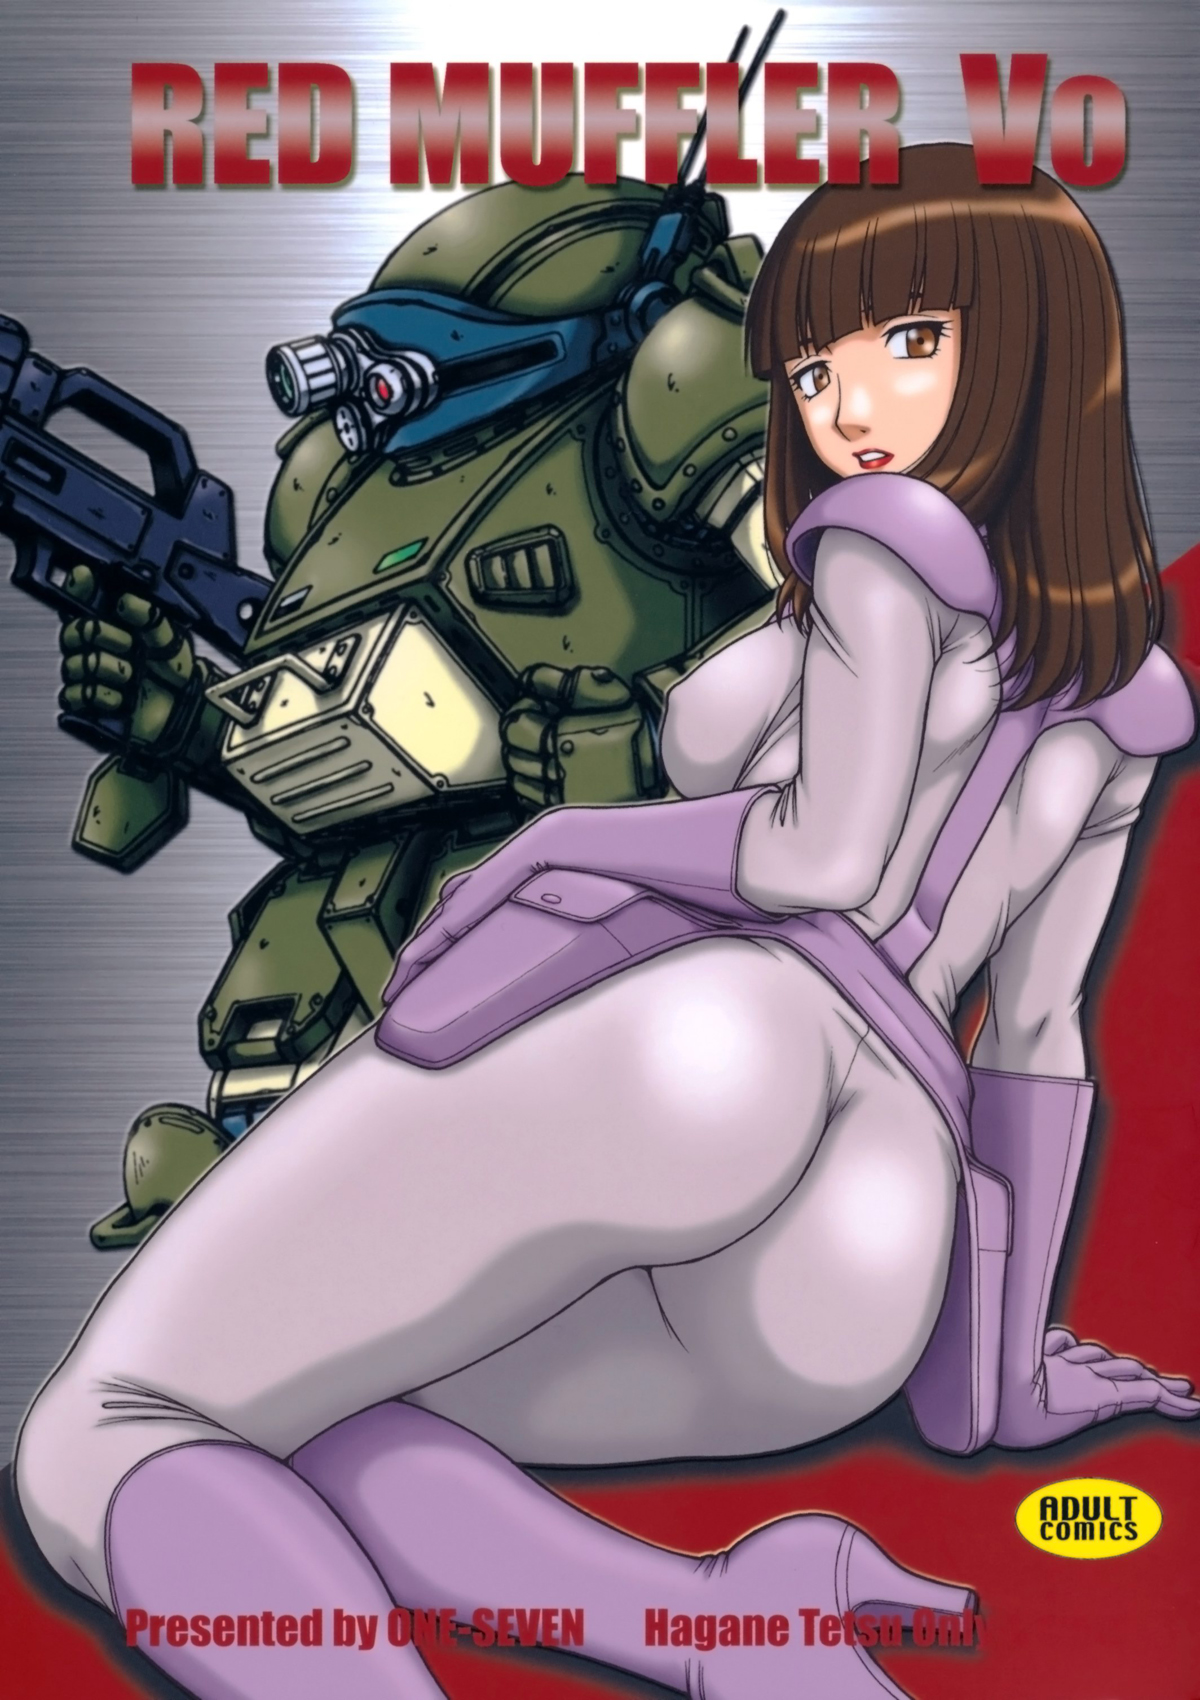 (C78) [One Seven] Red Muffler Vo (Armored Trooper VOTOMS) [English] [Chocolate] 